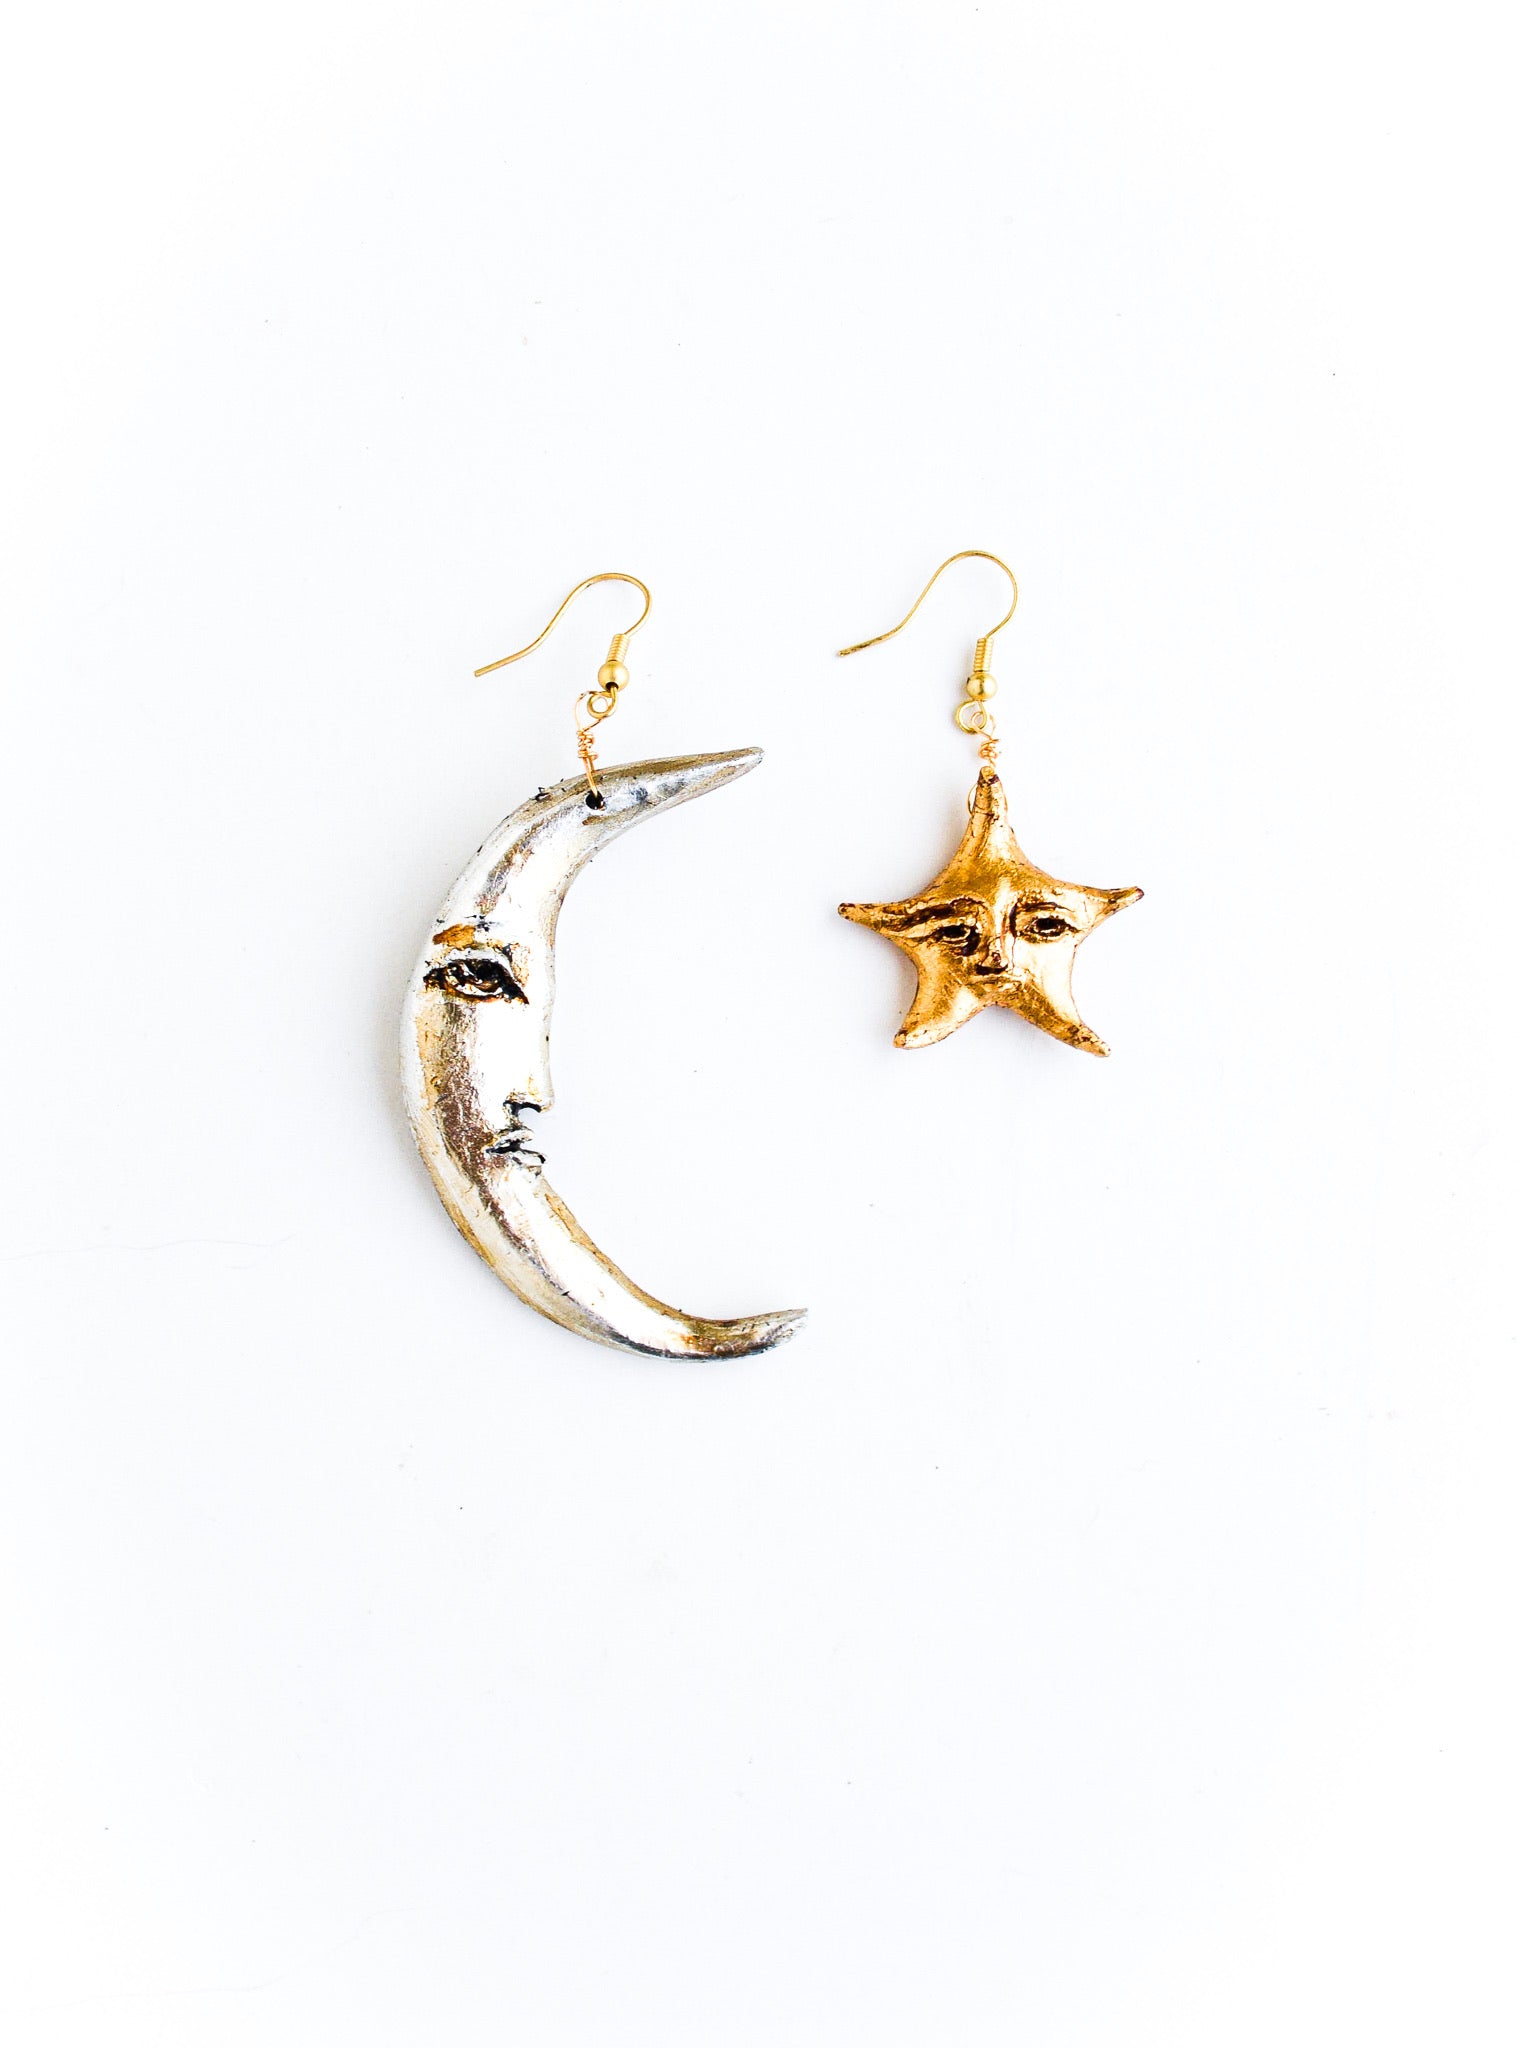 Emerging Moon + Lucky Star Collaboration Earrings